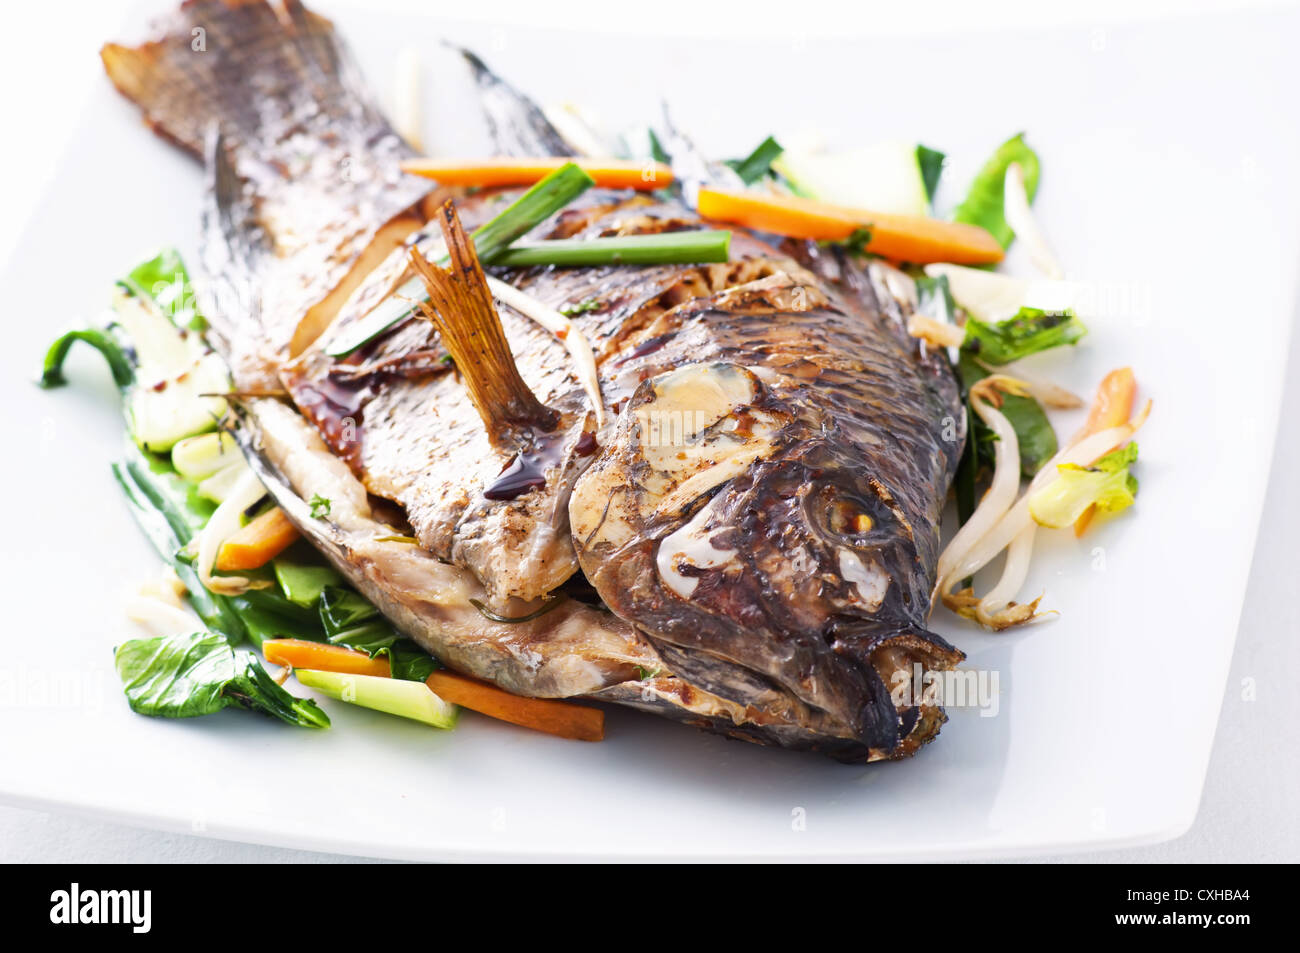 Tilapia fried with asian vegetables Stock Photo